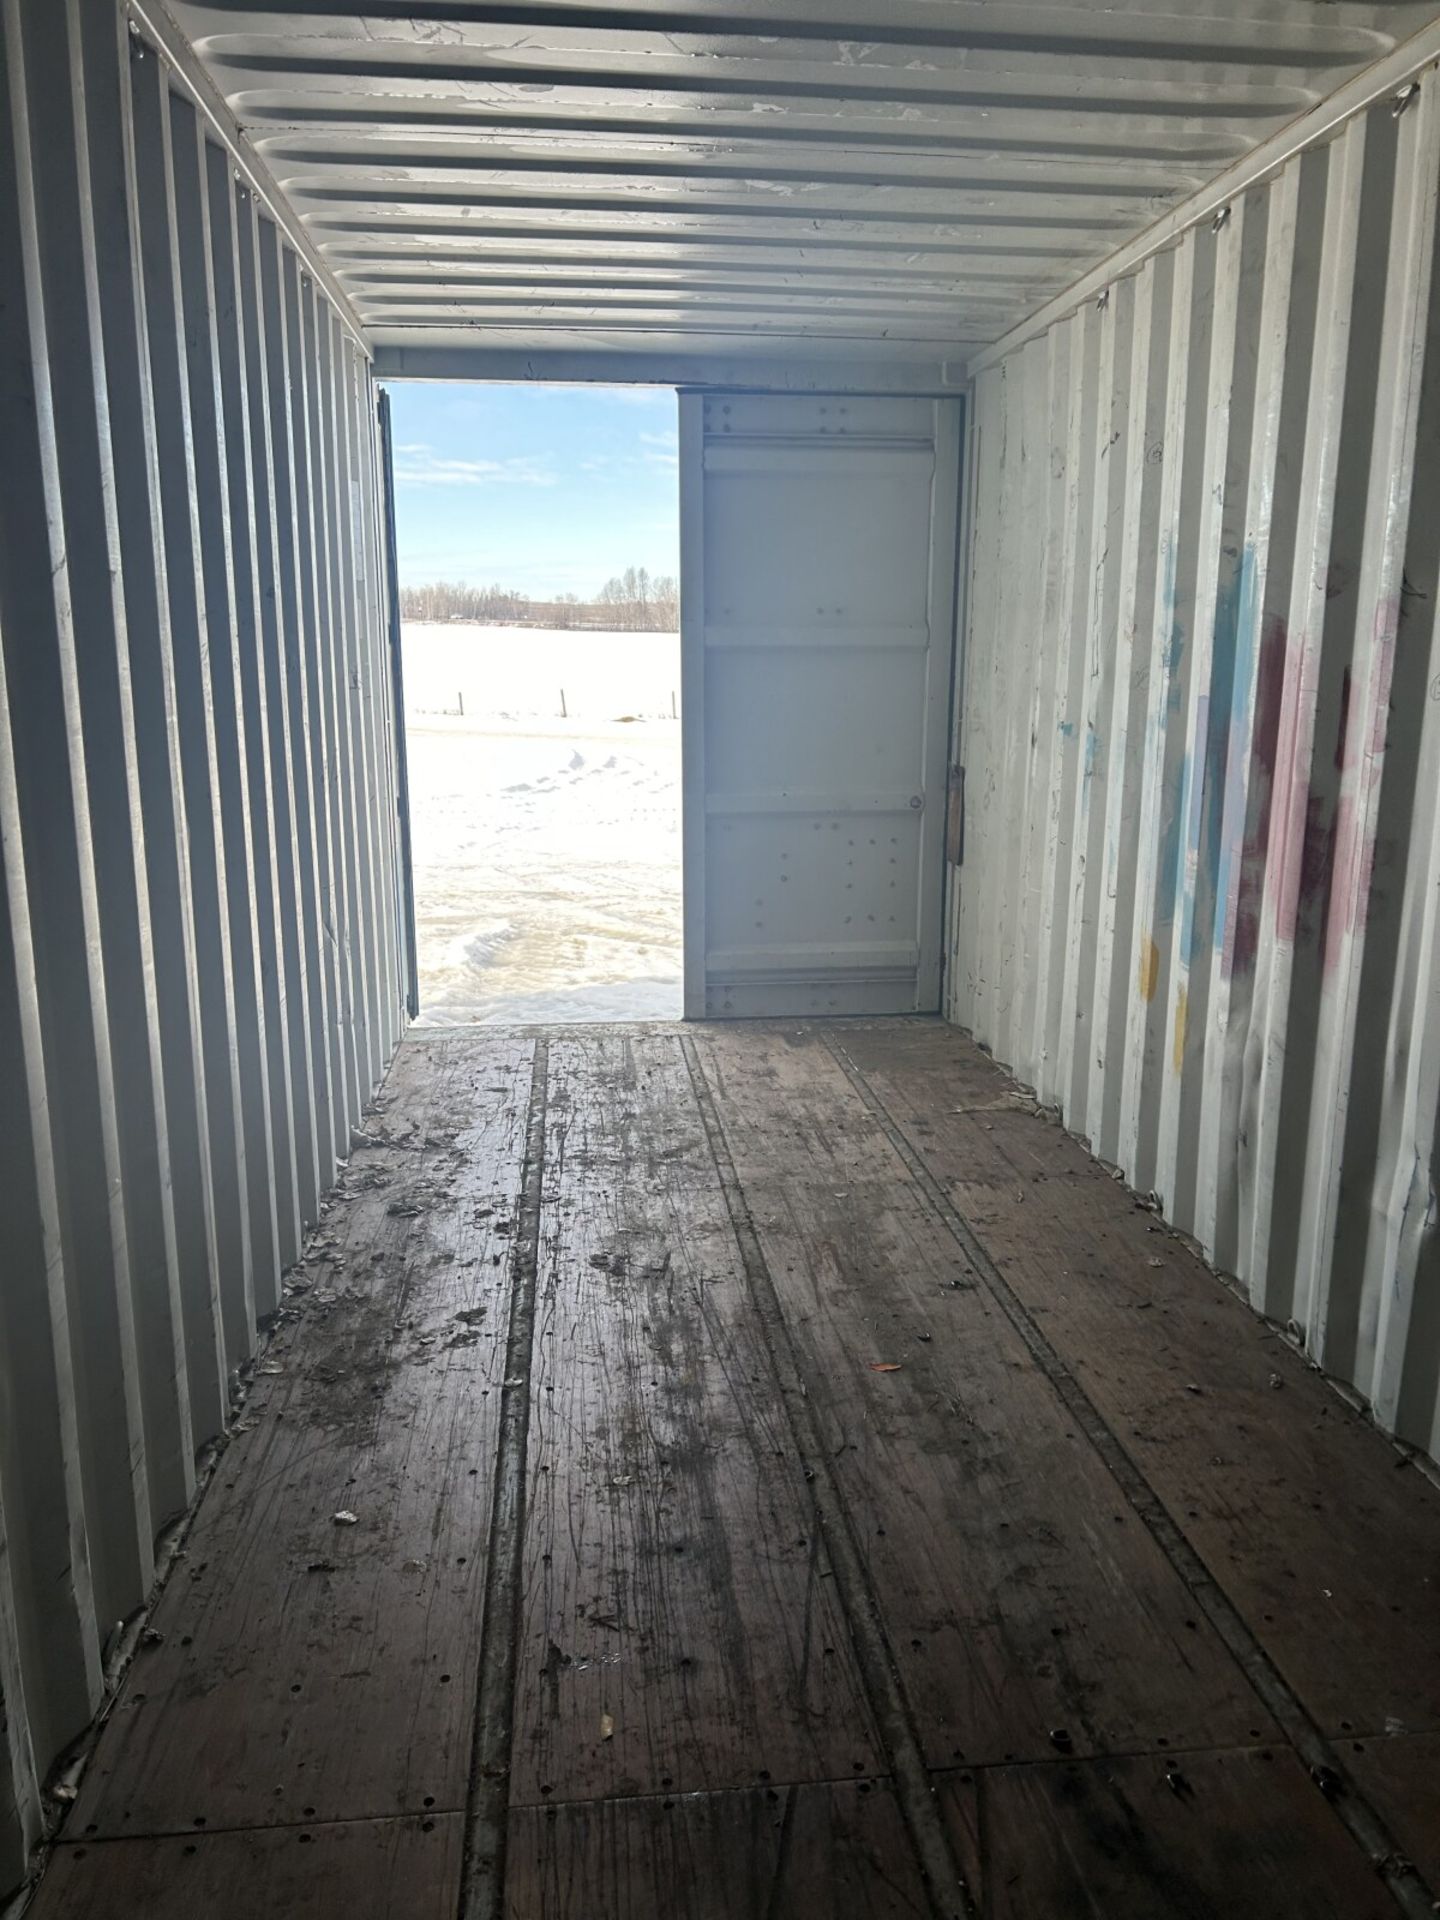 1997 40 FT HI-CUBE SEA-CONTAINER, ONE END DOORS, S/N EMCU9231245 - Image 6 of 6